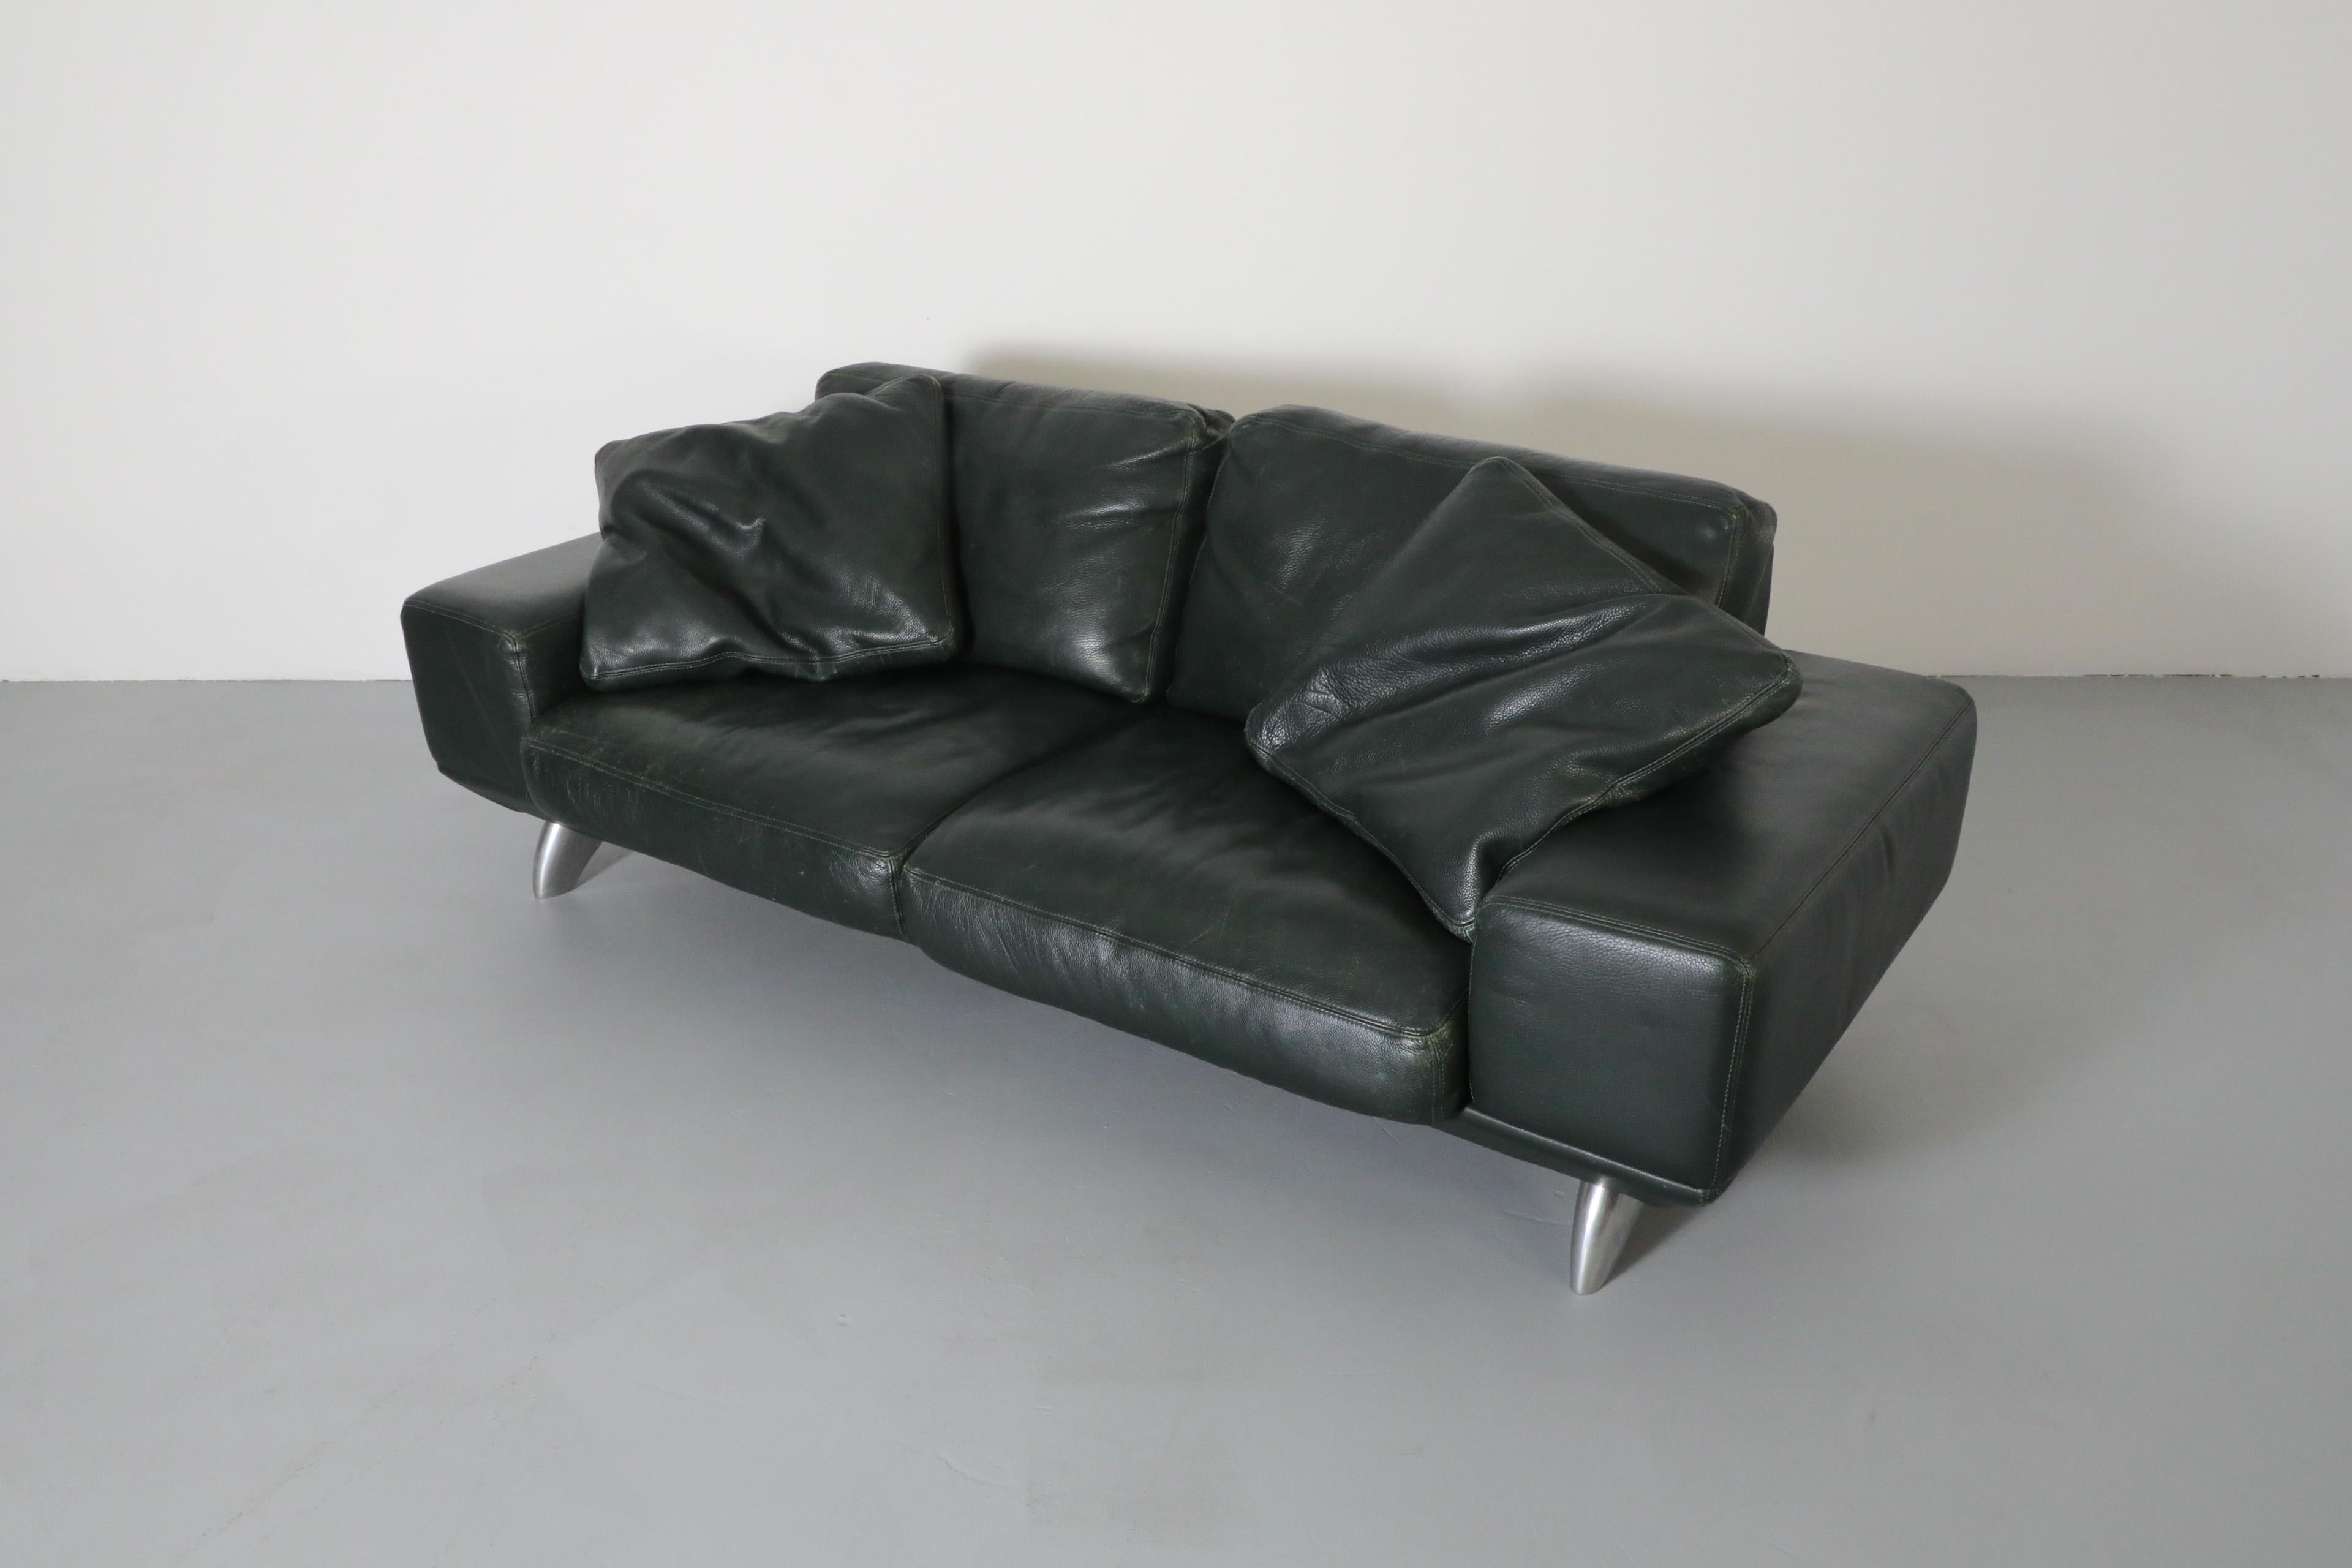 Italian Handsome 80's Dark Green Leather Sofa by Molinari w/ Wide Arms & Metal Legs For Sale